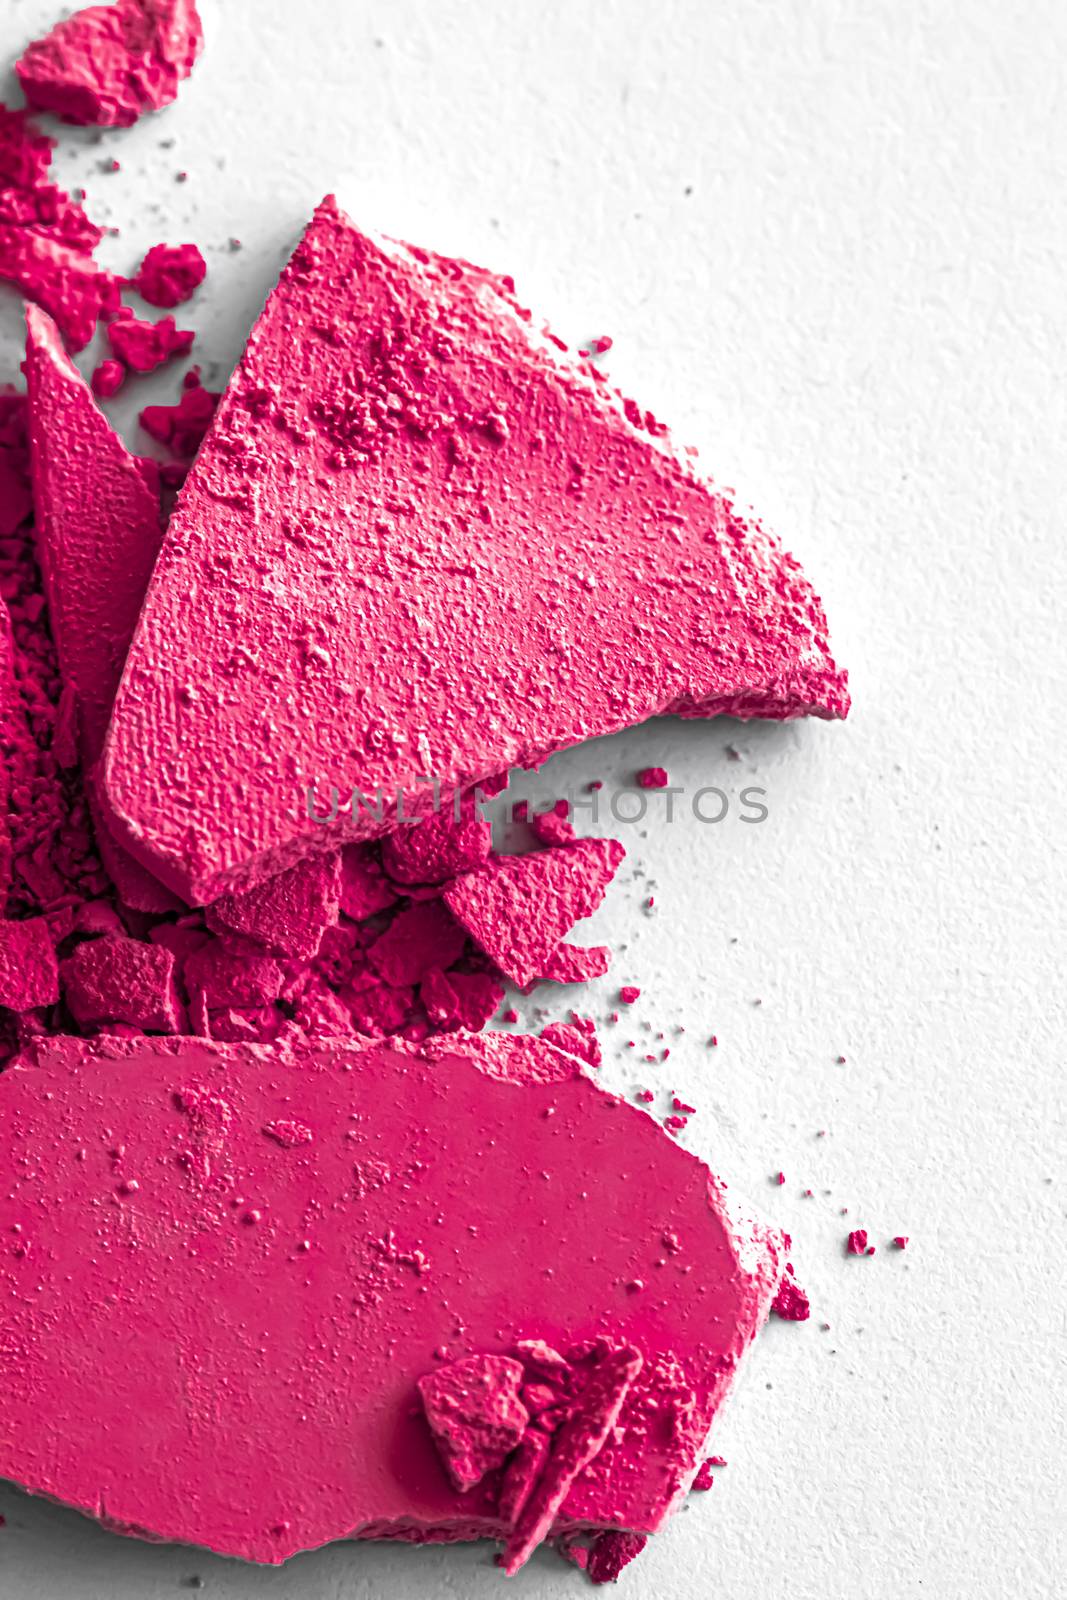 Pink eye shadow powder as makeup palette closeup isolated on white background, crushed cosmetics and beauty textures